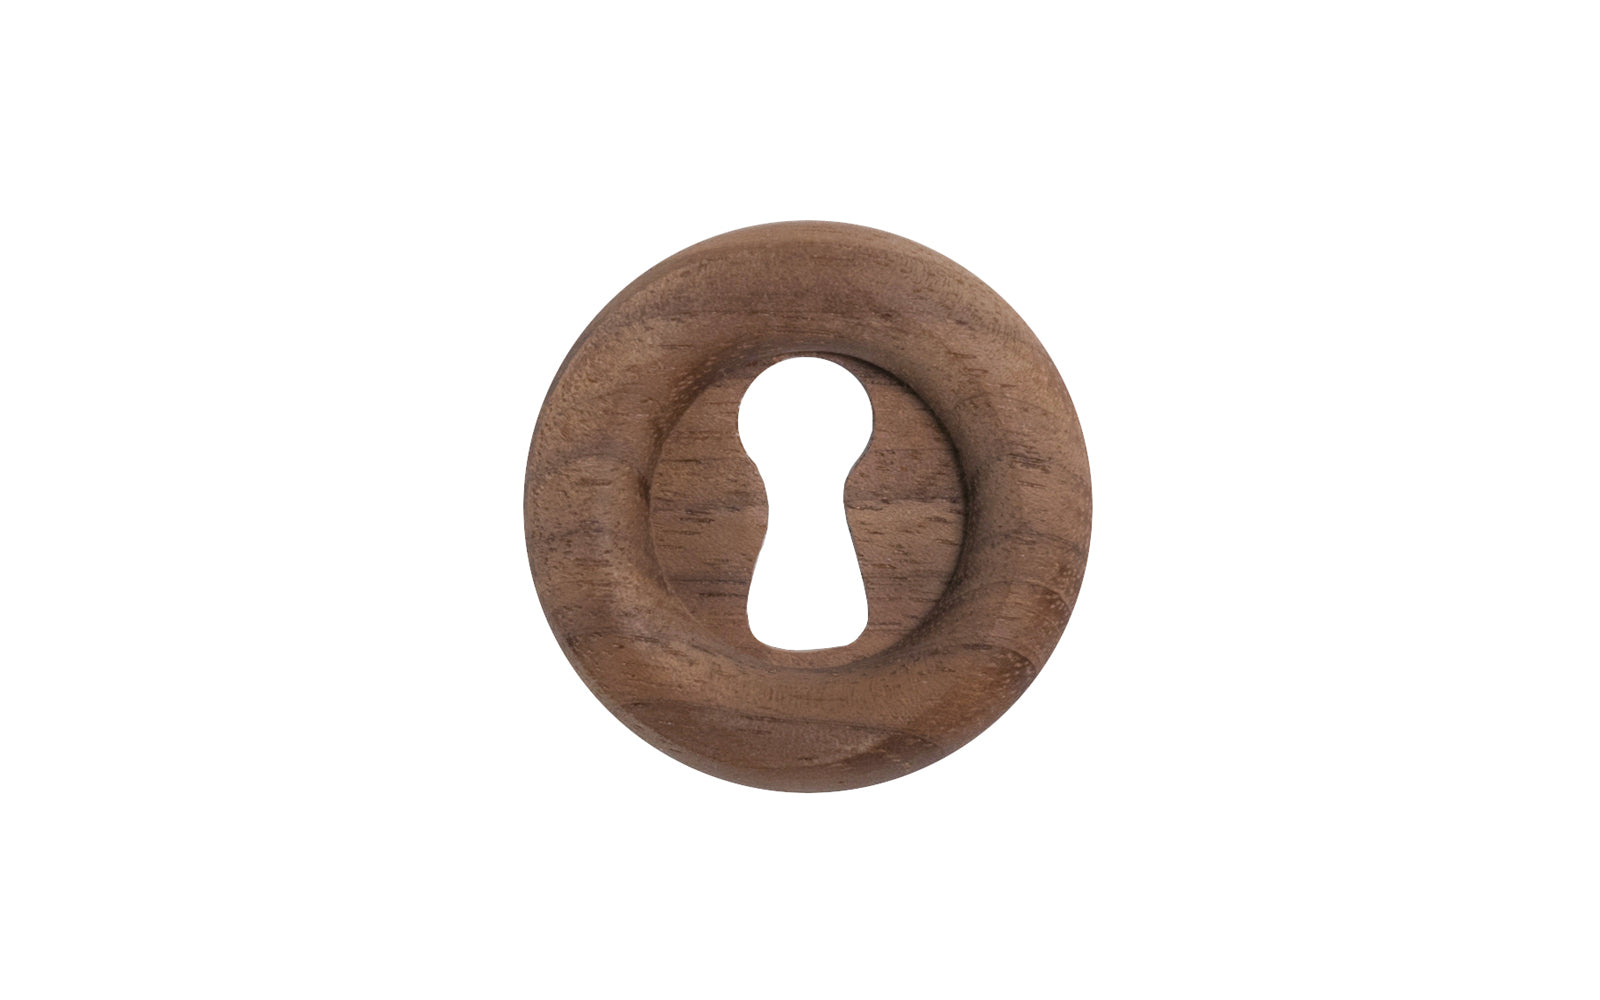 Round Walnut Wood Keyhole. Classic & traditional walnut wood keyhole with a smooth round design. Made of solid unfinished walnut wood. The keyhole may even be stained, painted, or varnished if desired. Available in 1-1/16" & 1-1/4" diameter sizes. Great for drawers, cabinets & furniture.